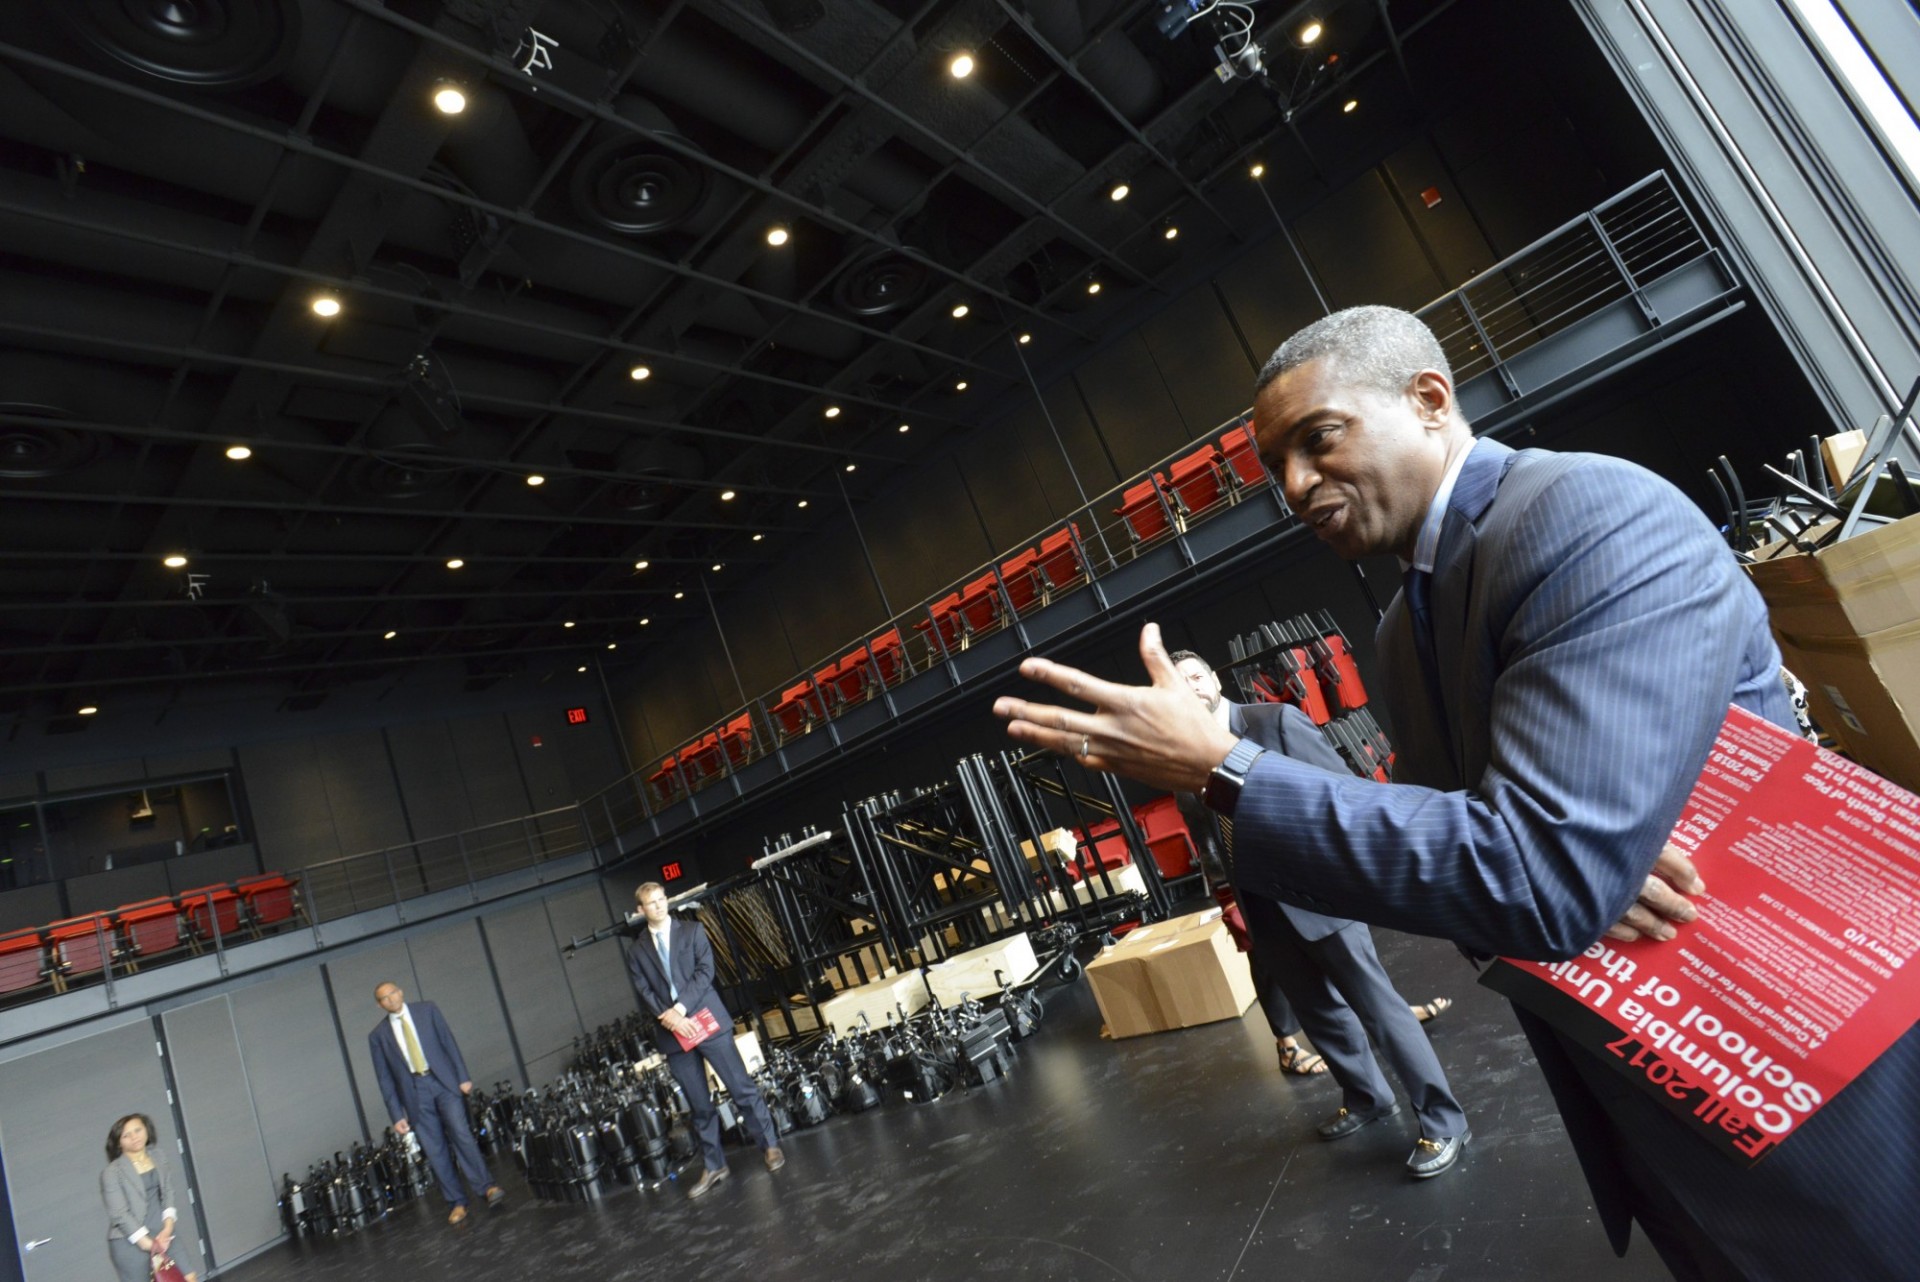 Gerrard Bushell, president and CEO of DASNY, touring the flexible performance space at the Lenfest Center for the Arts. (Photo credit: DASNY)